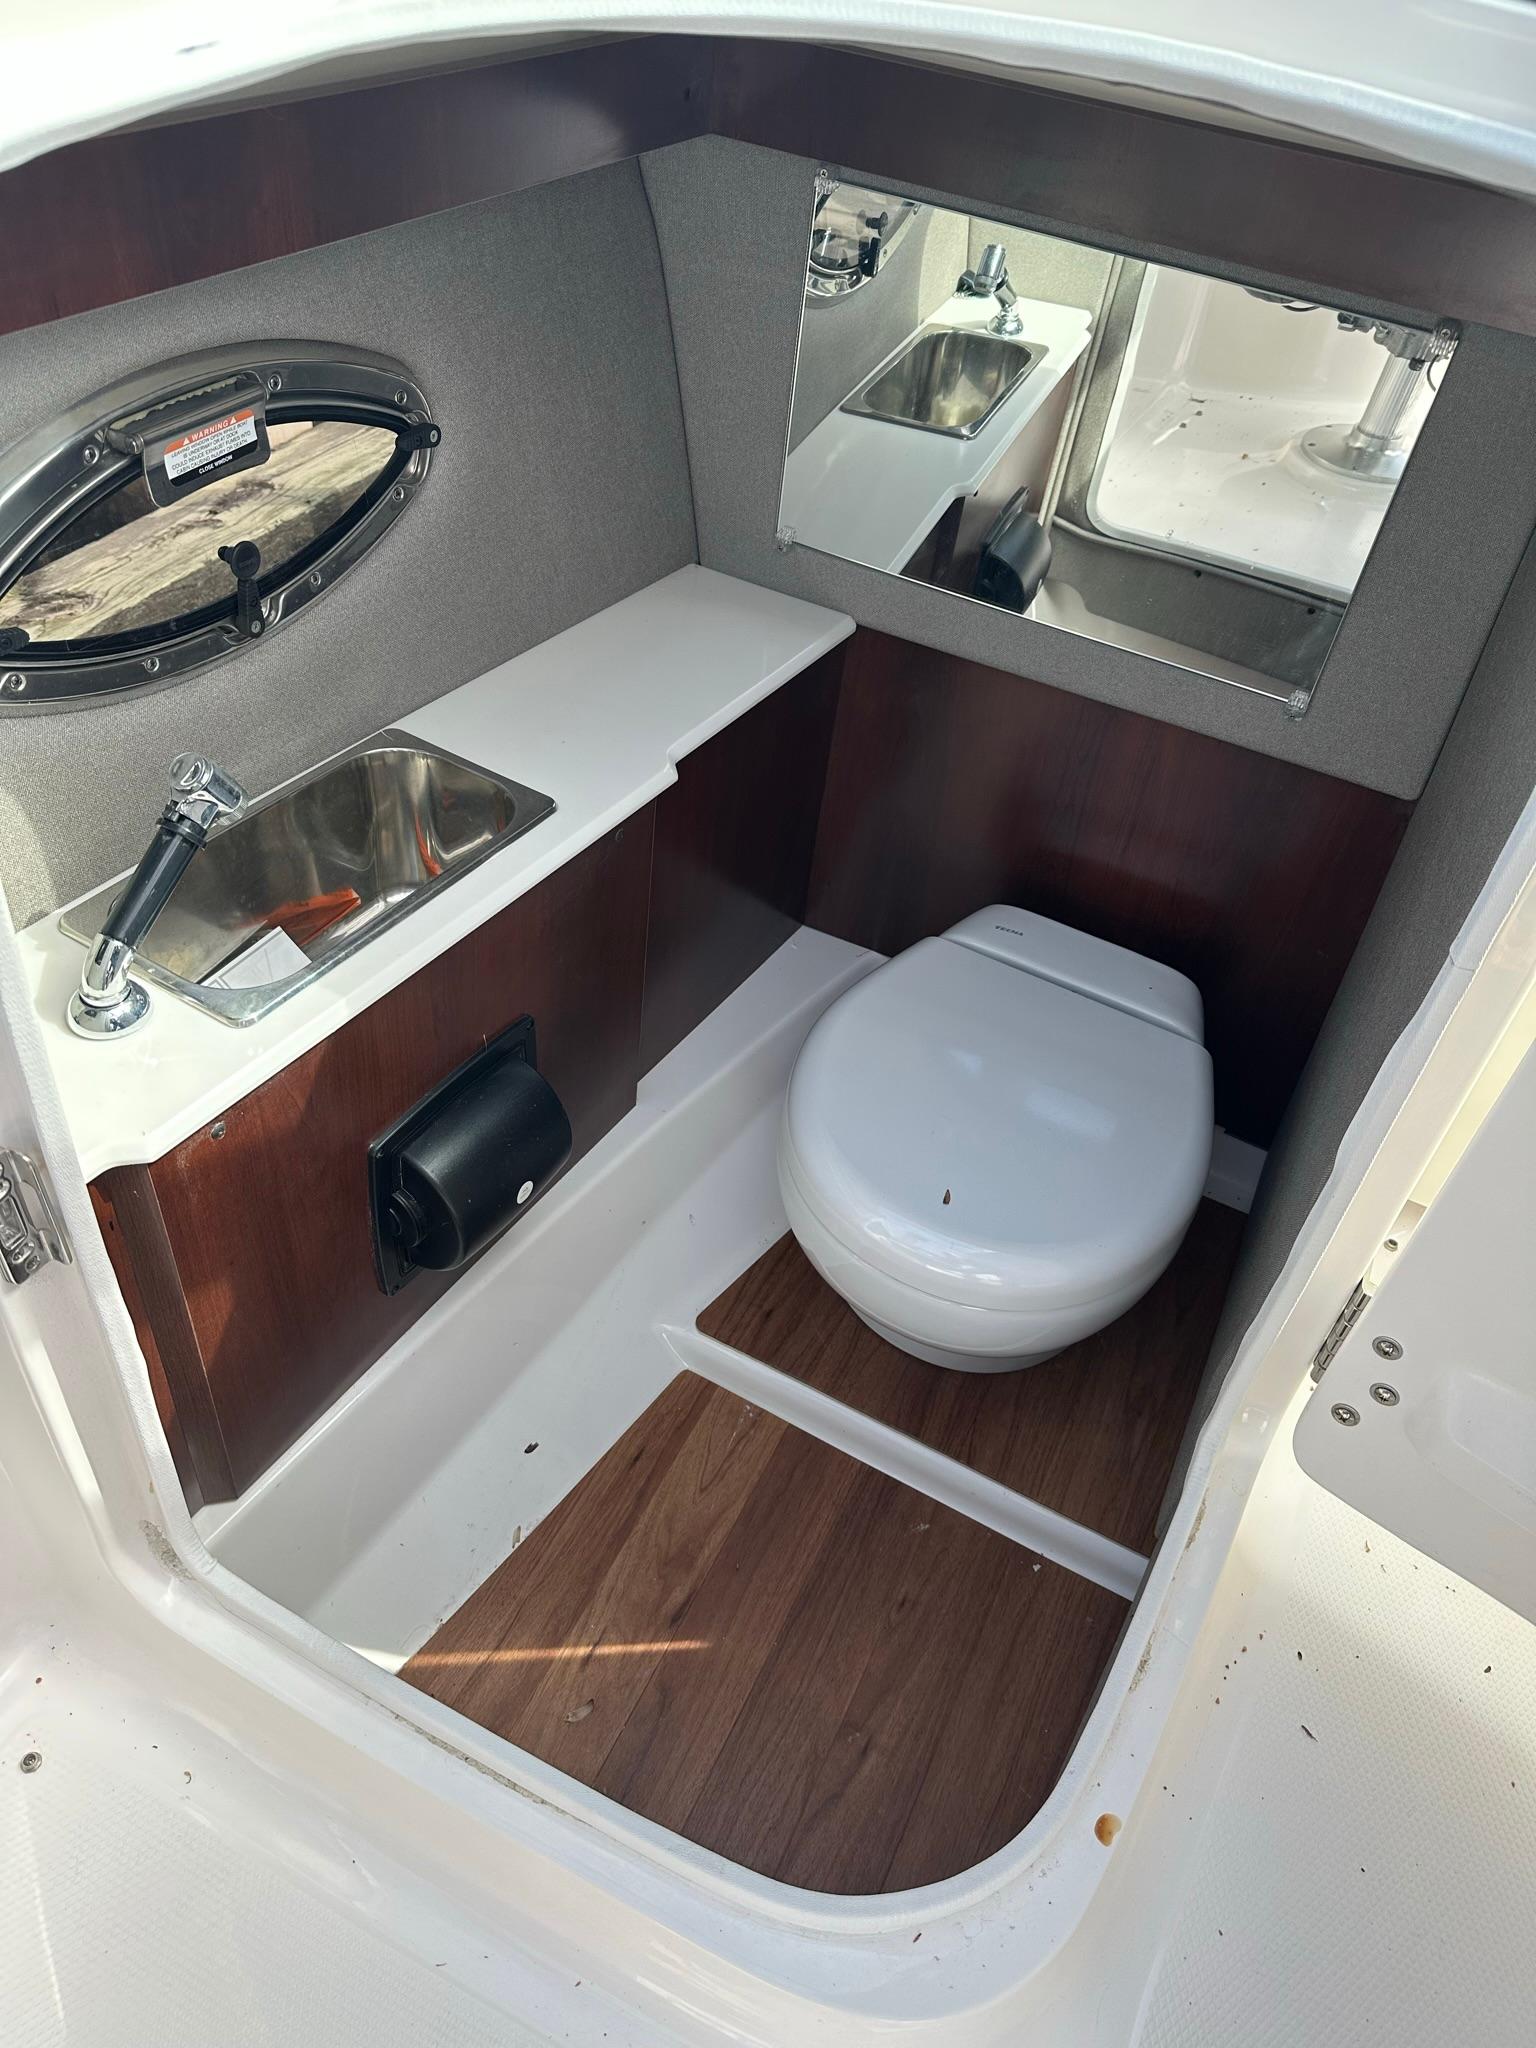 2022 Chaparral 267ssx OB, enclosed toilet and sink